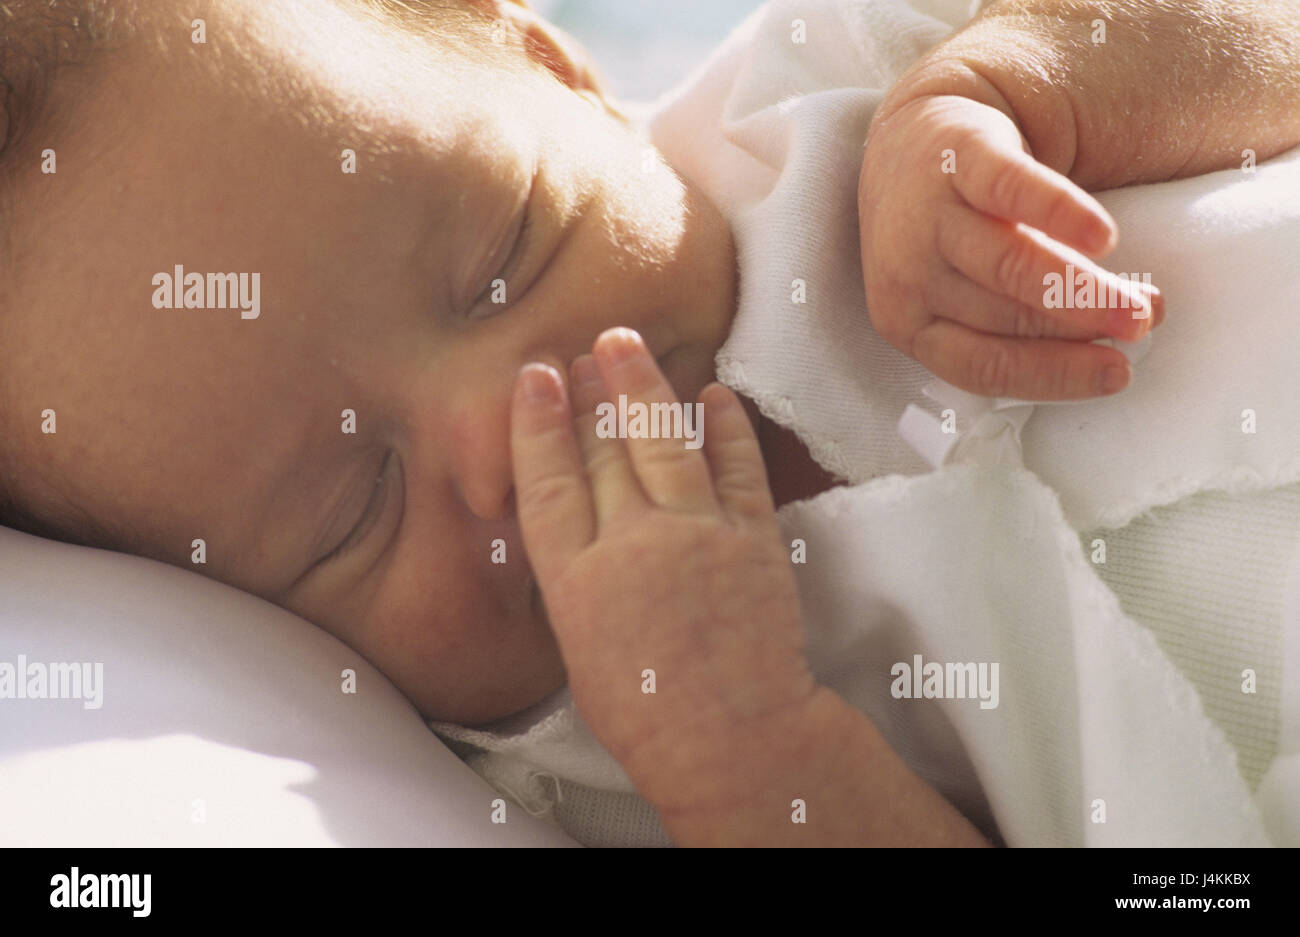 Newborn child, sleep, detail child, small, baby, infant, look, gesture, hands, lie, rest page position, fallen asleep, dream, peacefully, softly, vulnerable, curled, inside, sleep, conception, childhood, fatigue, détente, rest, after-lunch sleep, rest, security, innocence, Stock Photo